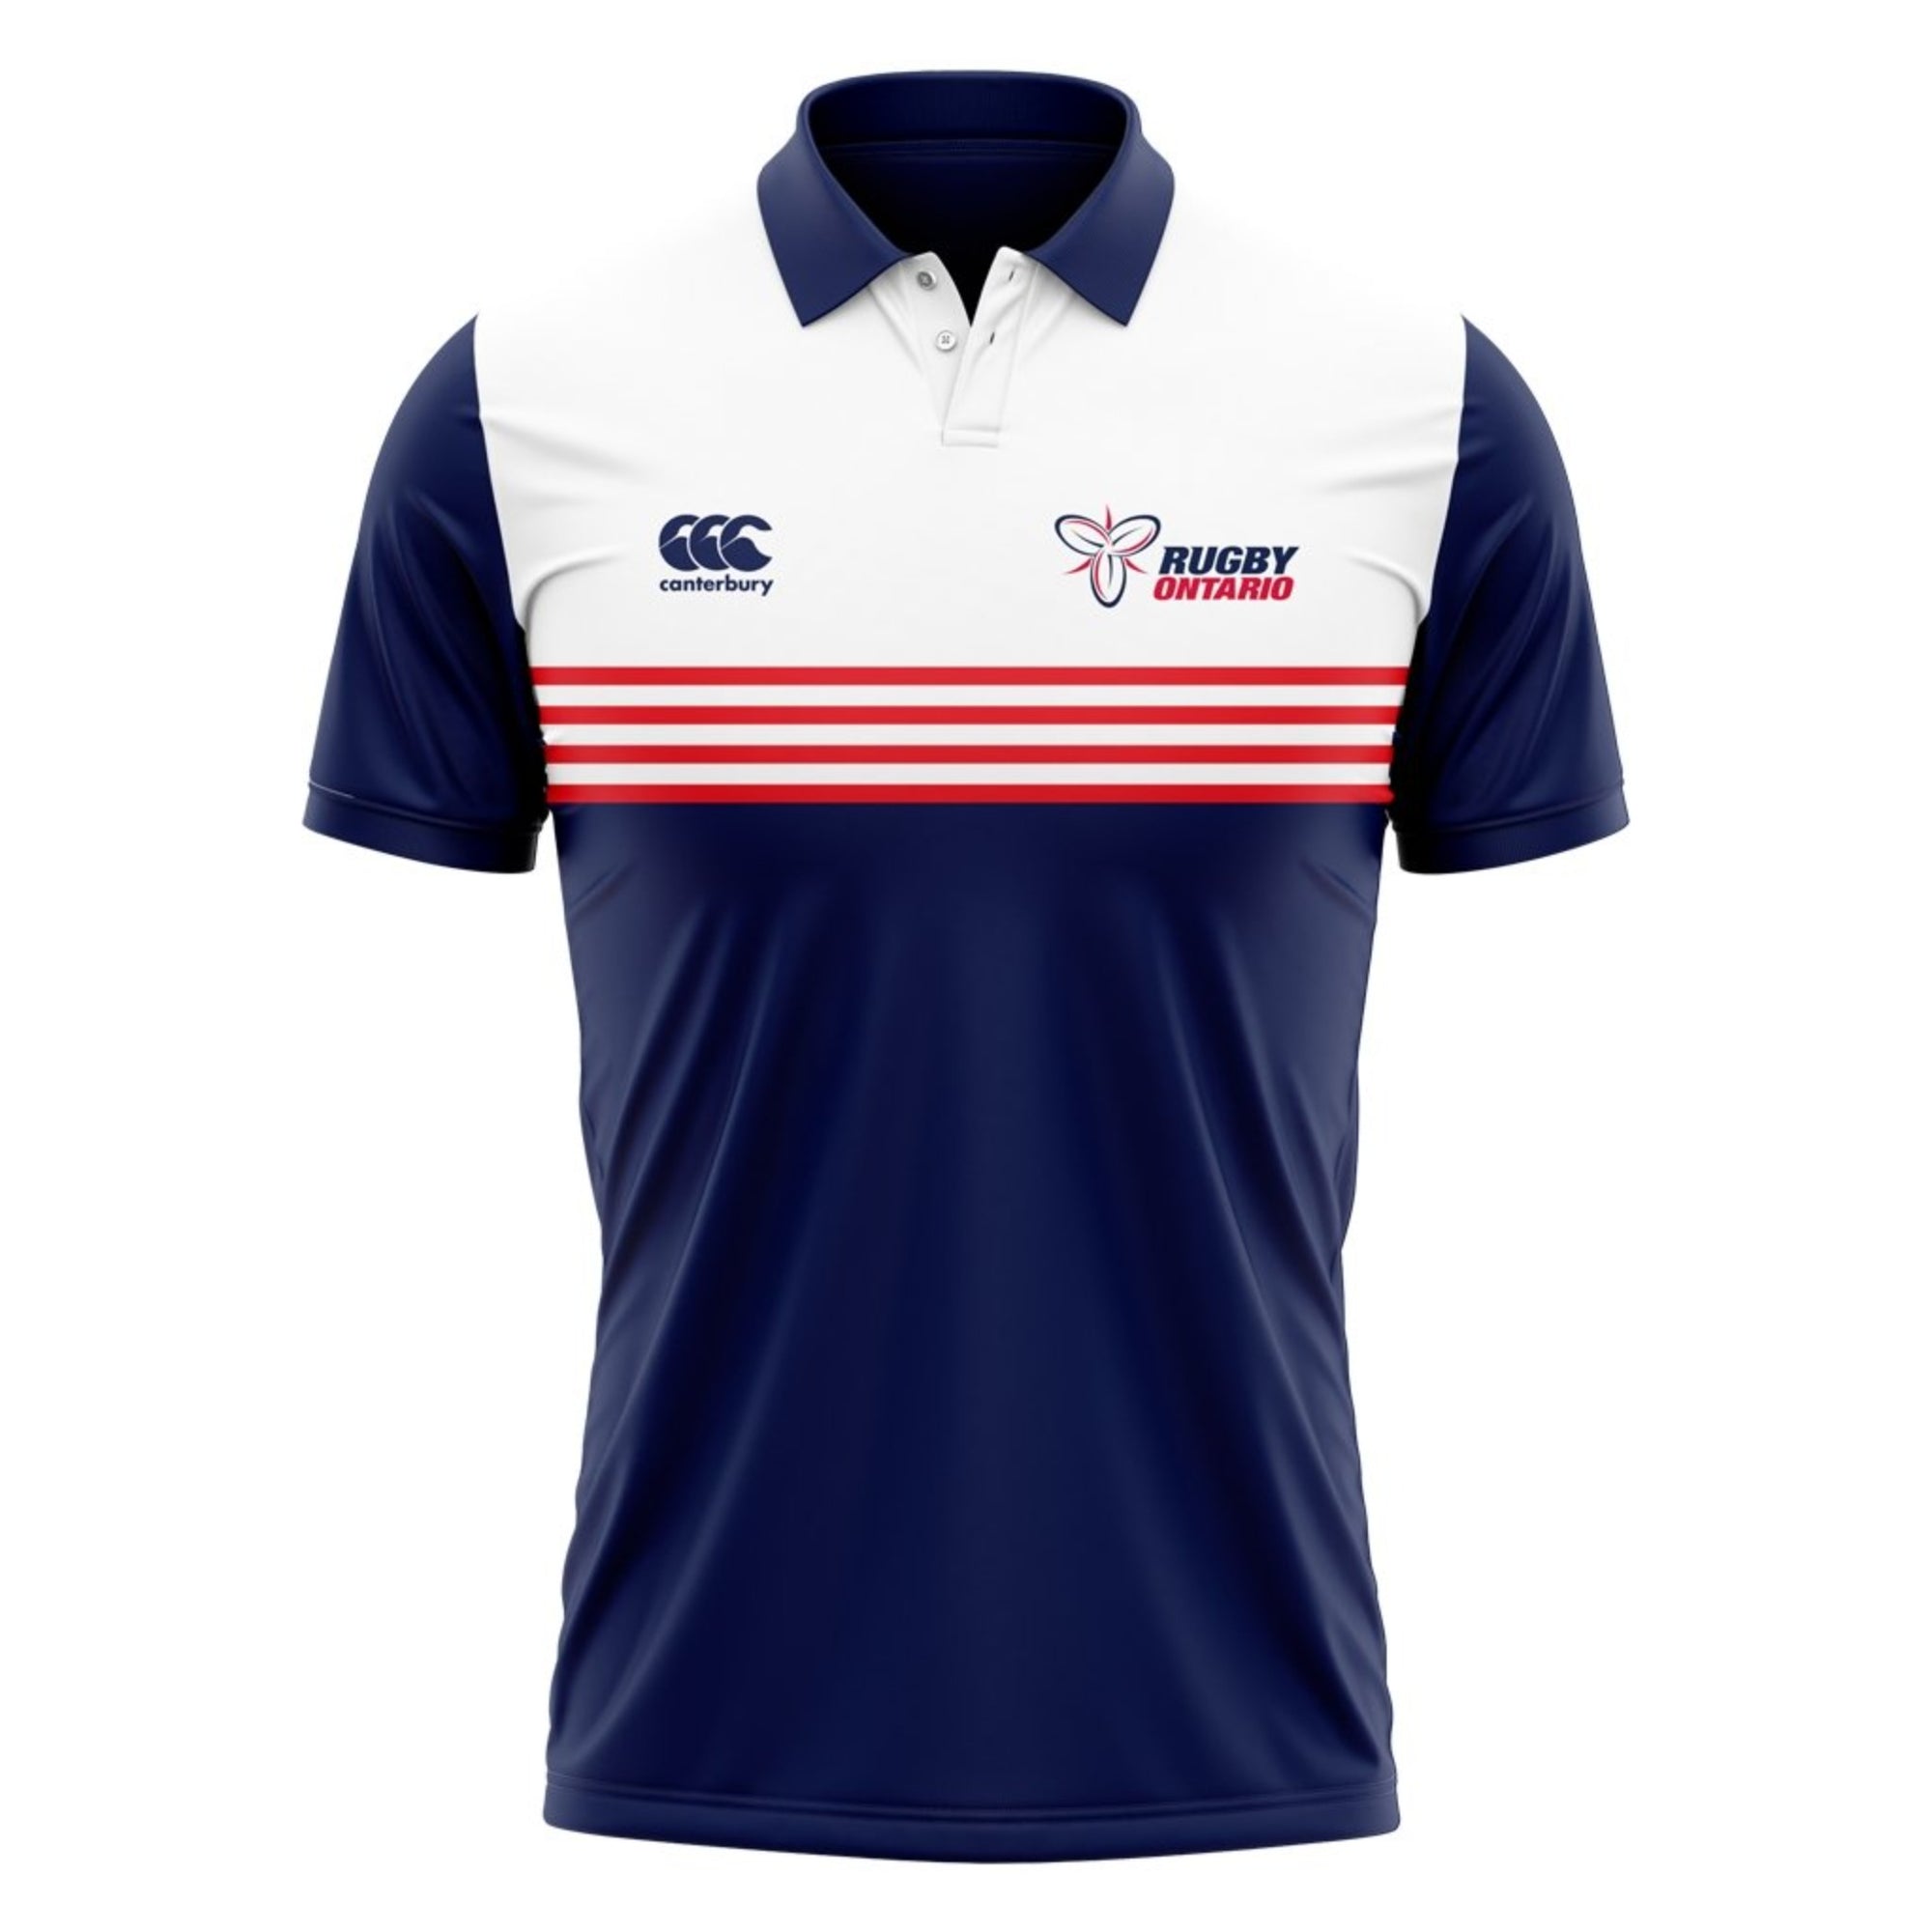 Rugby Ontario CCC Classic Performance Polo - Men's - The Rugby Shop The Rugby Shop MEN'S / NAVY / XS TRS Distribution Canada (Mudoo) POLO Rugby Ontario CCC Classic Performance Polo - Men's